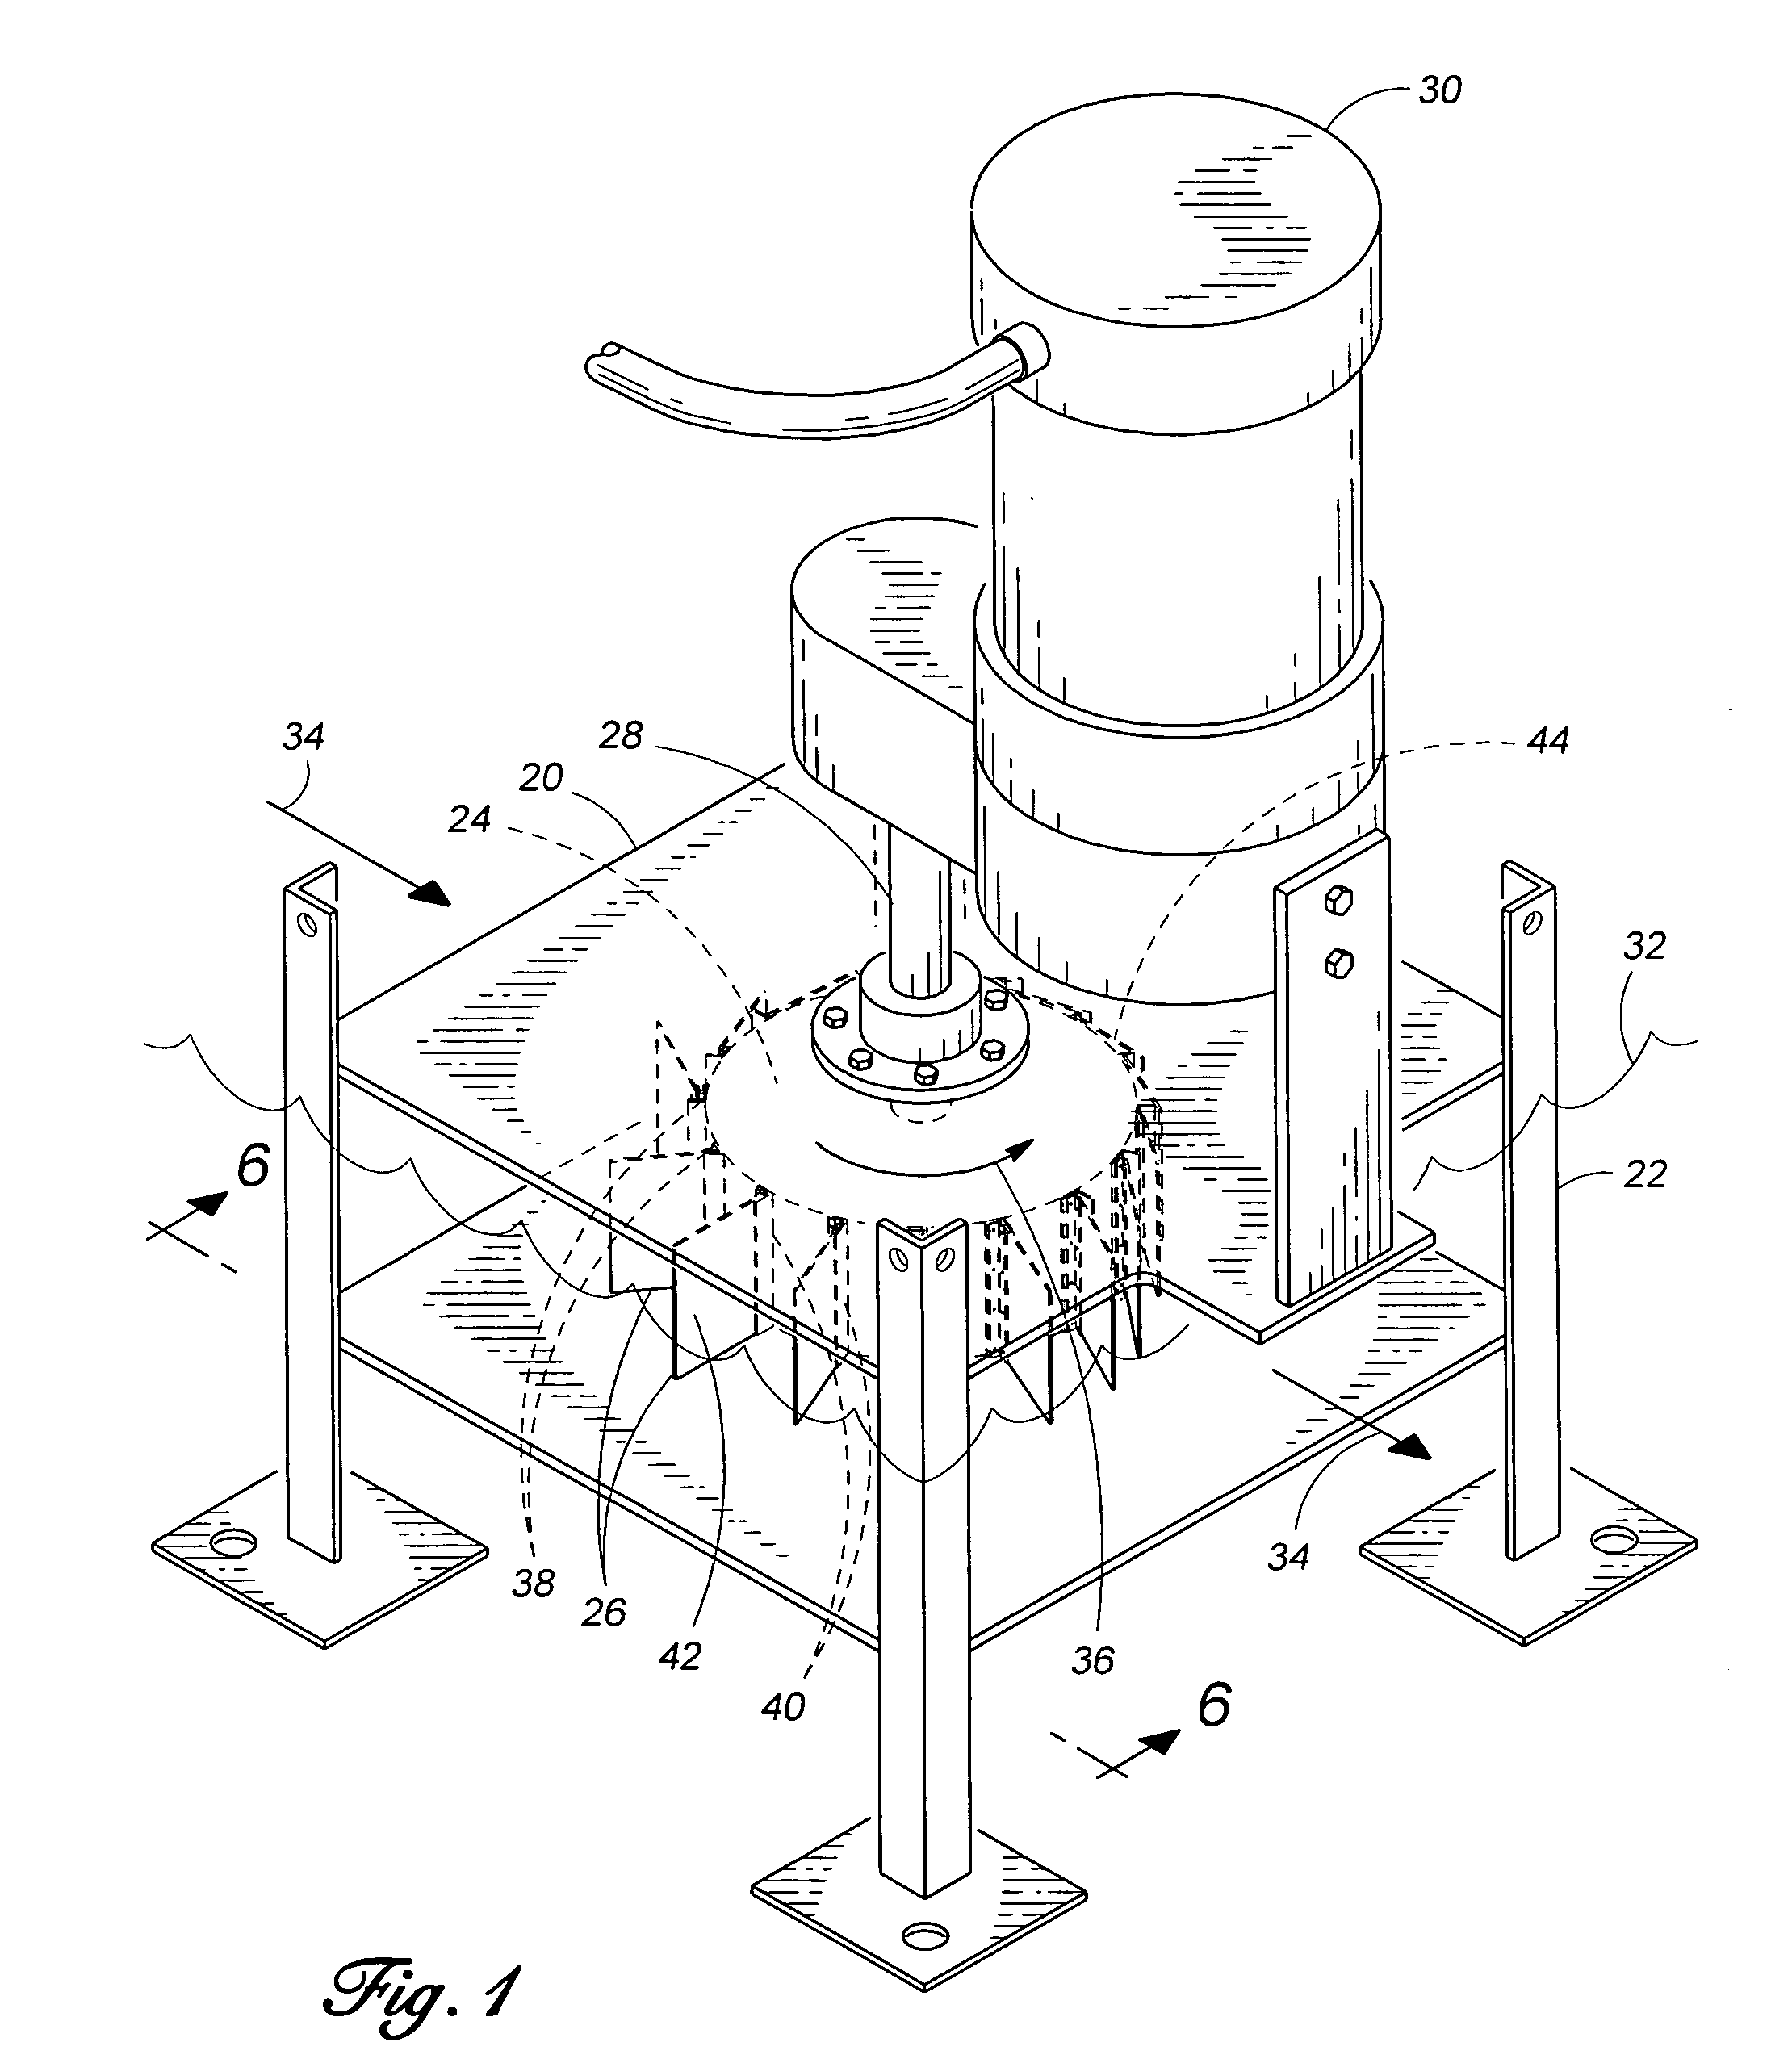 Hinged blade device to convert the natural flow or ocean or river current or ocean waves to rotational mechanical motion for power generation